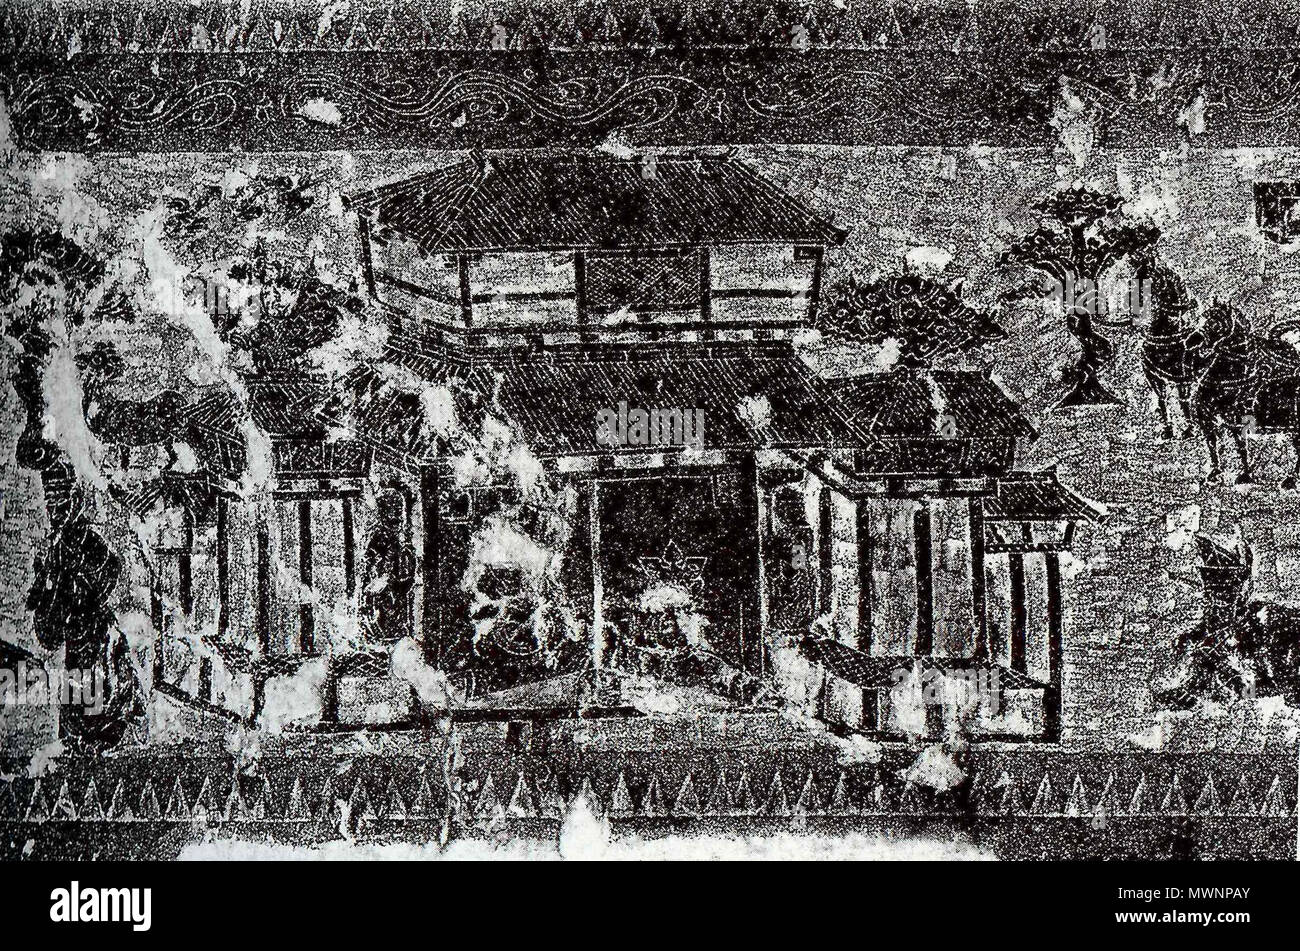 . A rubbing of a Chinese Han Dynasty (202 BC – 220 AD) pictorial stone (i.e. the Yinan stone carving of Shandong province, China) showing an ancestral worship hall (citang 祠堂) with closed doors, a person outside making a sacrificial offering to his ancestors, and horses and trees in the background. 202 BC to 220 AD. Unknown 531 Rubbing of a Han Citang Stock Photo